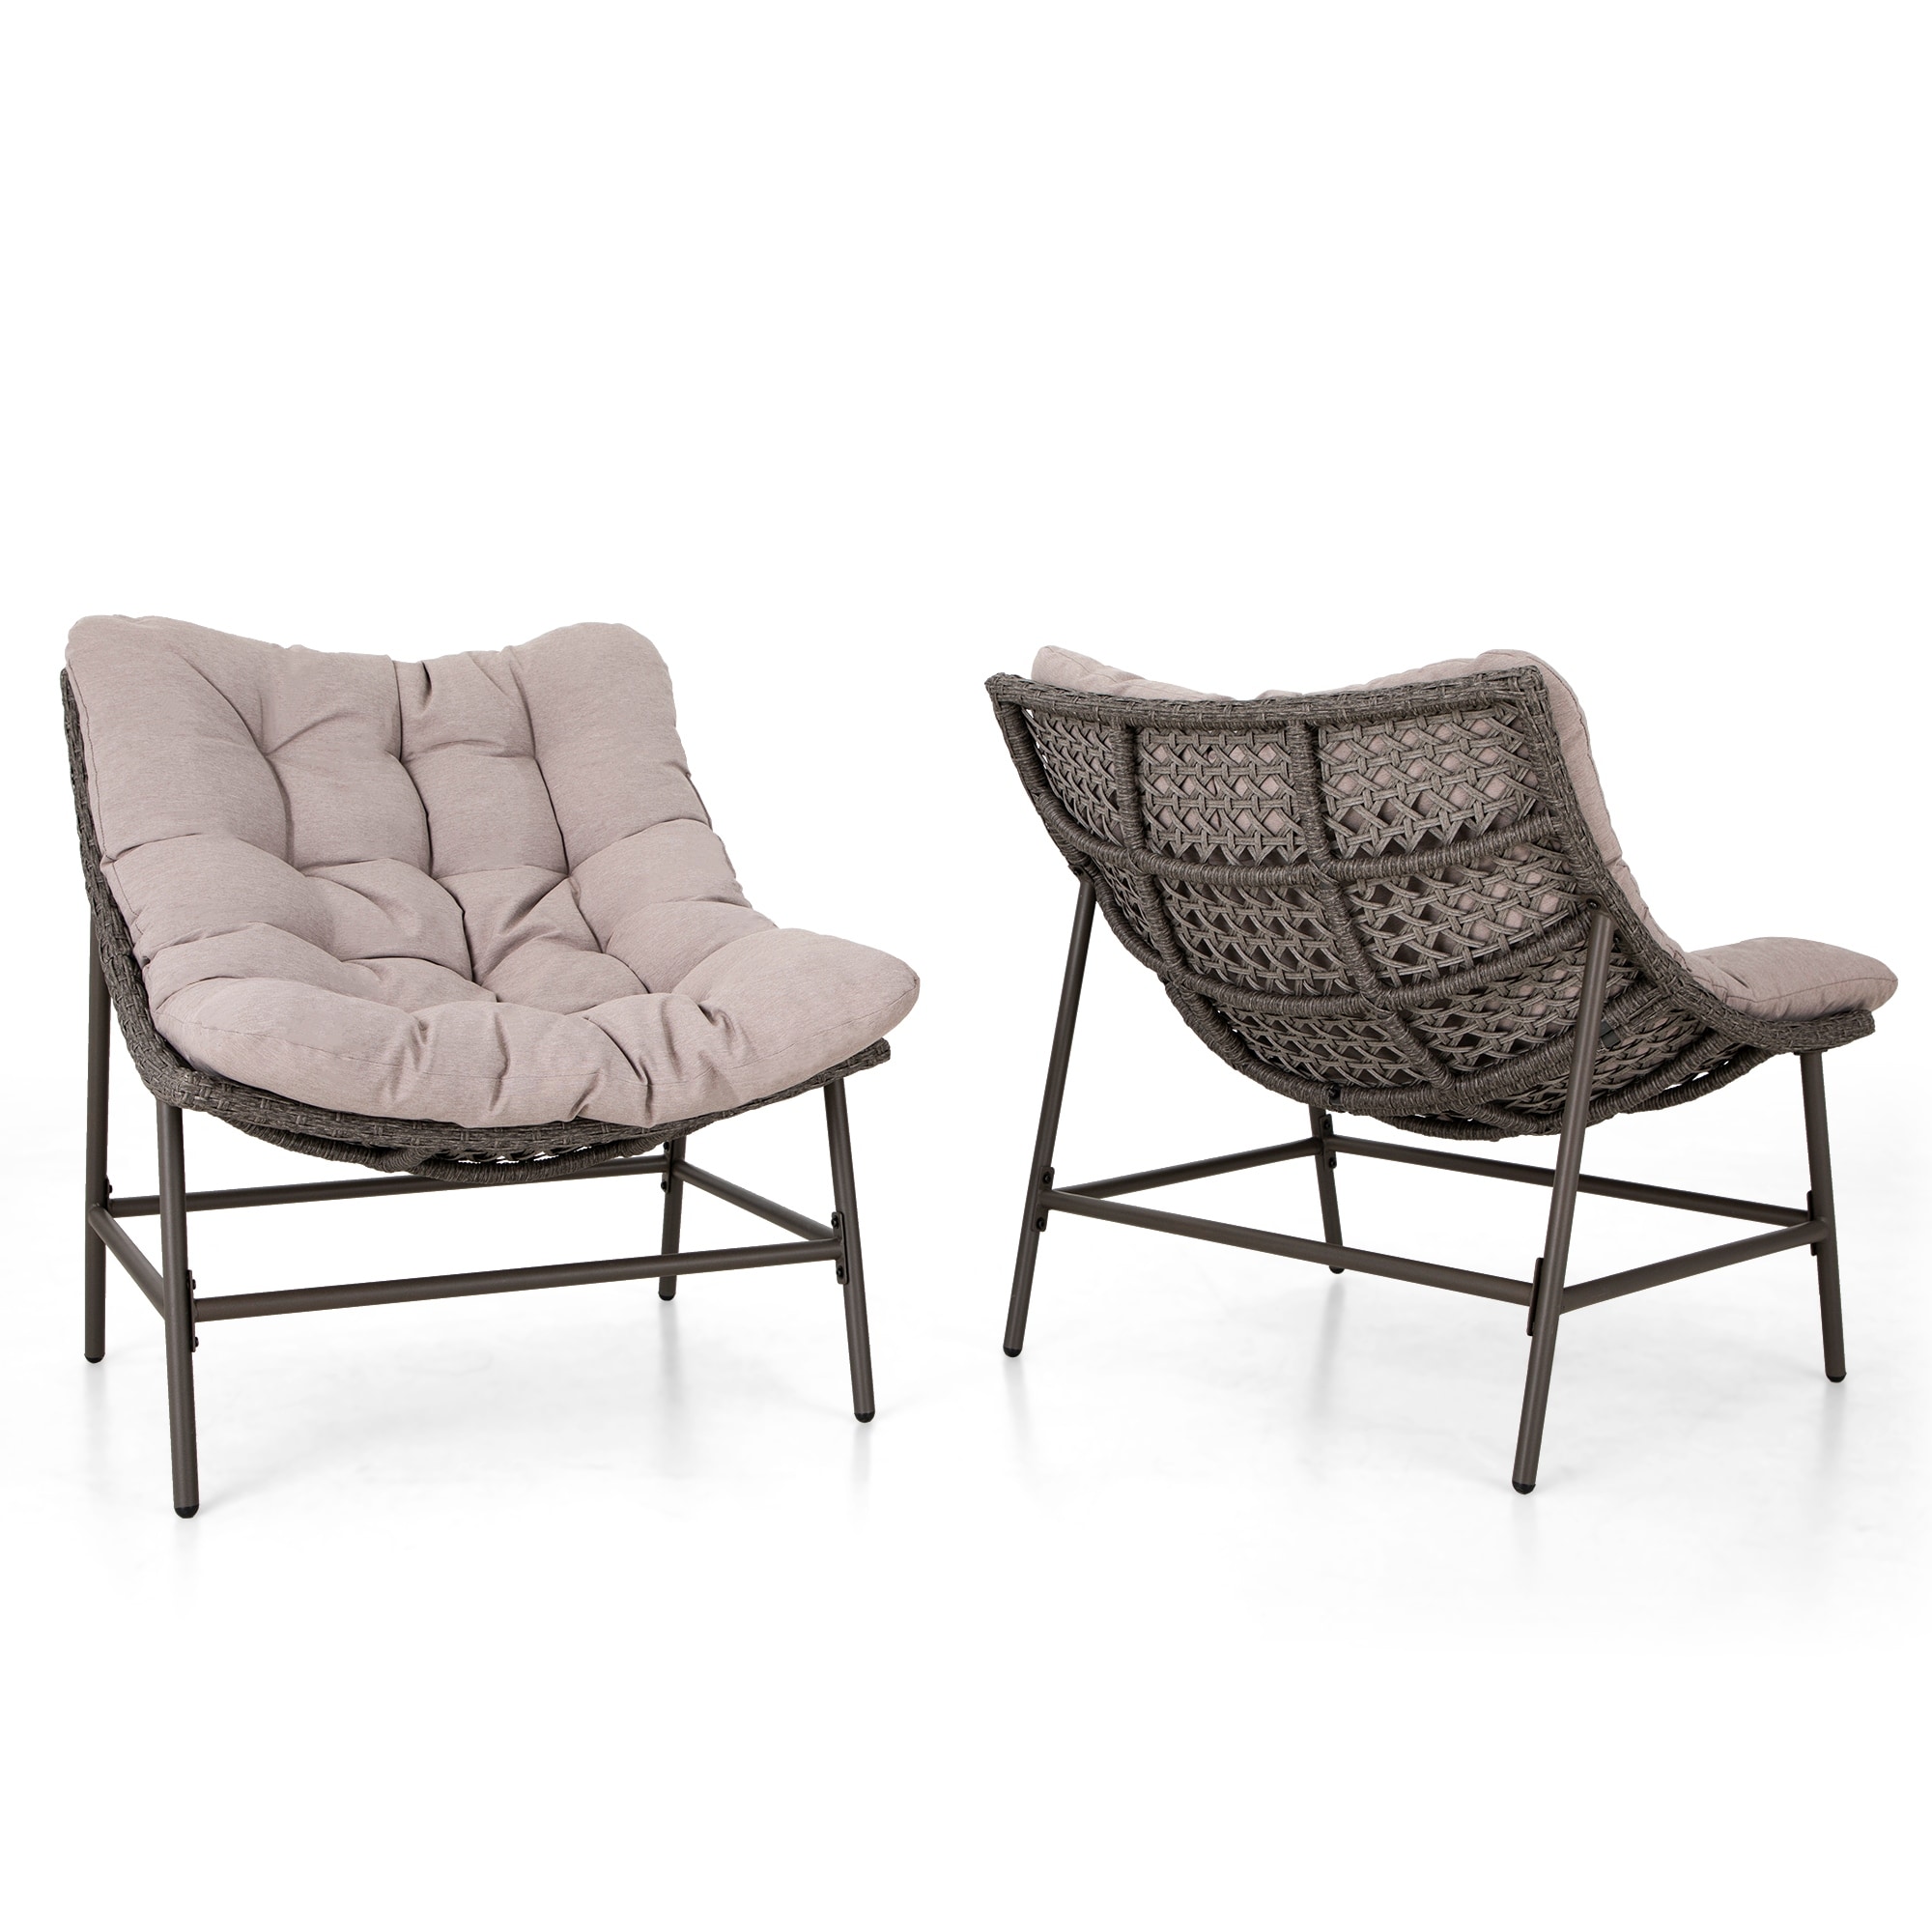 https://ak1.ostkcdn.com/images/products/is/images/direct/917e96752dd2f578789a5ee9a3b36800d096b9e9/2-Piece-Outdoor-Rattan-Lounge-Chairs%2C-Oversized-Scoop-Chairs-with-Thick-Padded-Cushions-and-Steel-Frame.jpg